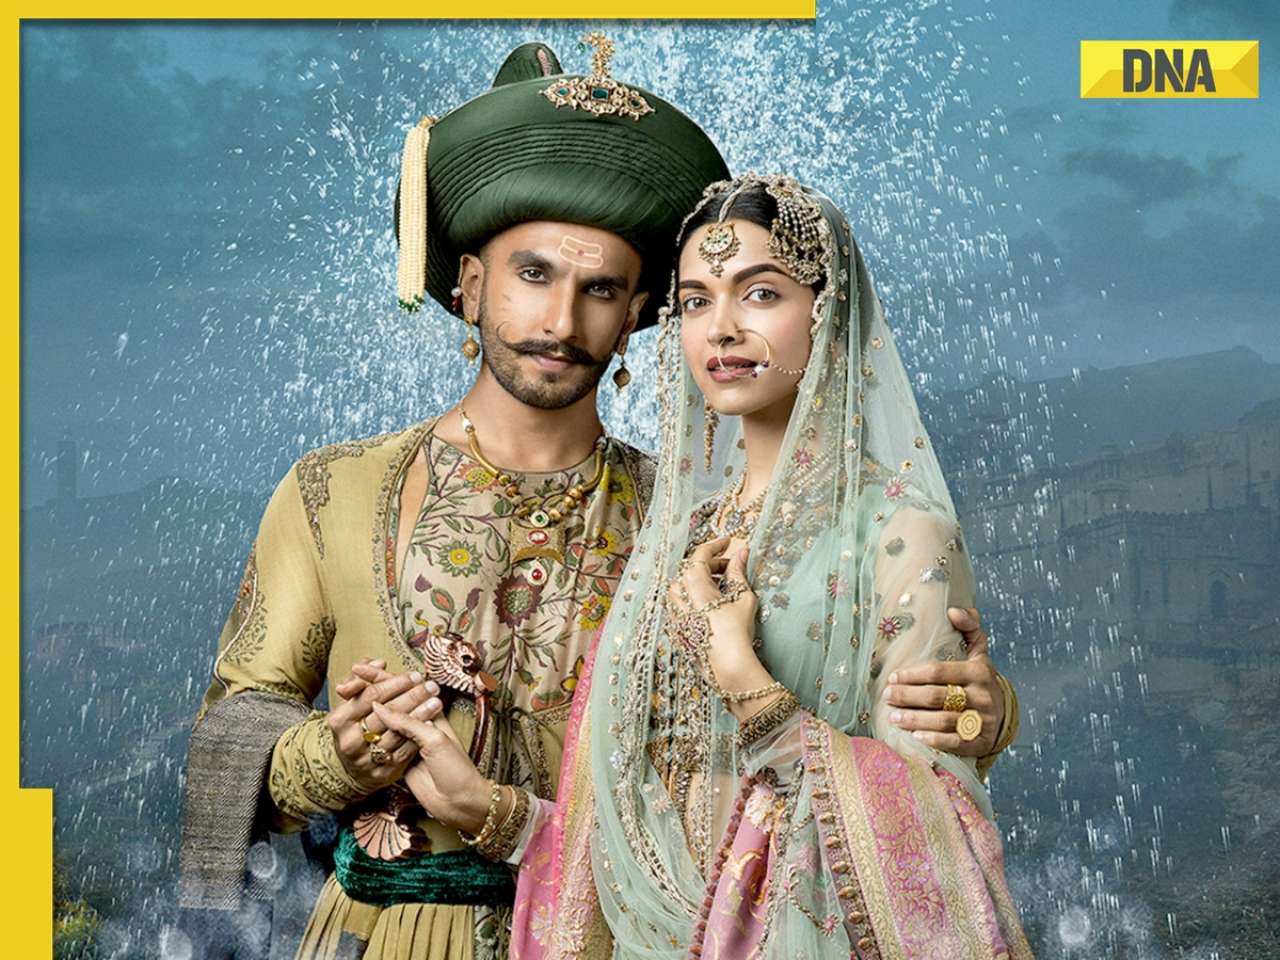 Before Ranveer Singh, Deepika Padukone; Bajirao Mastani was announced with these two superstars in 70s, it got shelved